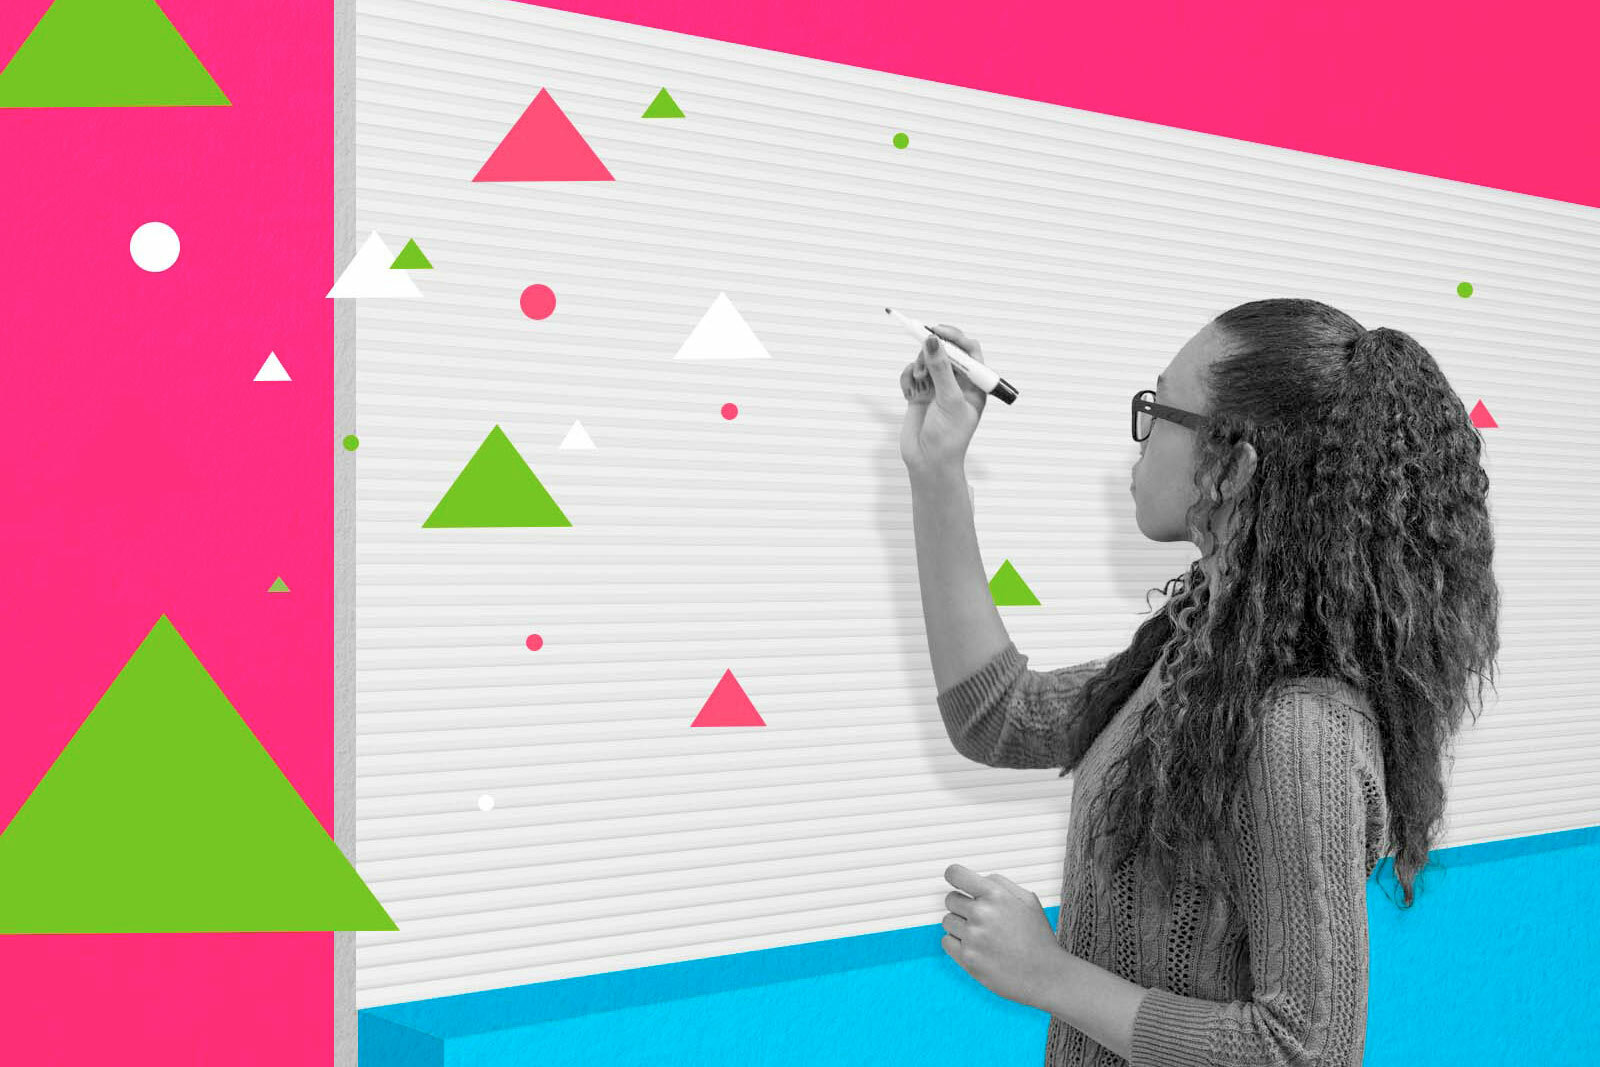 Image of a young woman writing on an illustrated white board created from cut paper images. Triangle motifs come from the marker in her hand